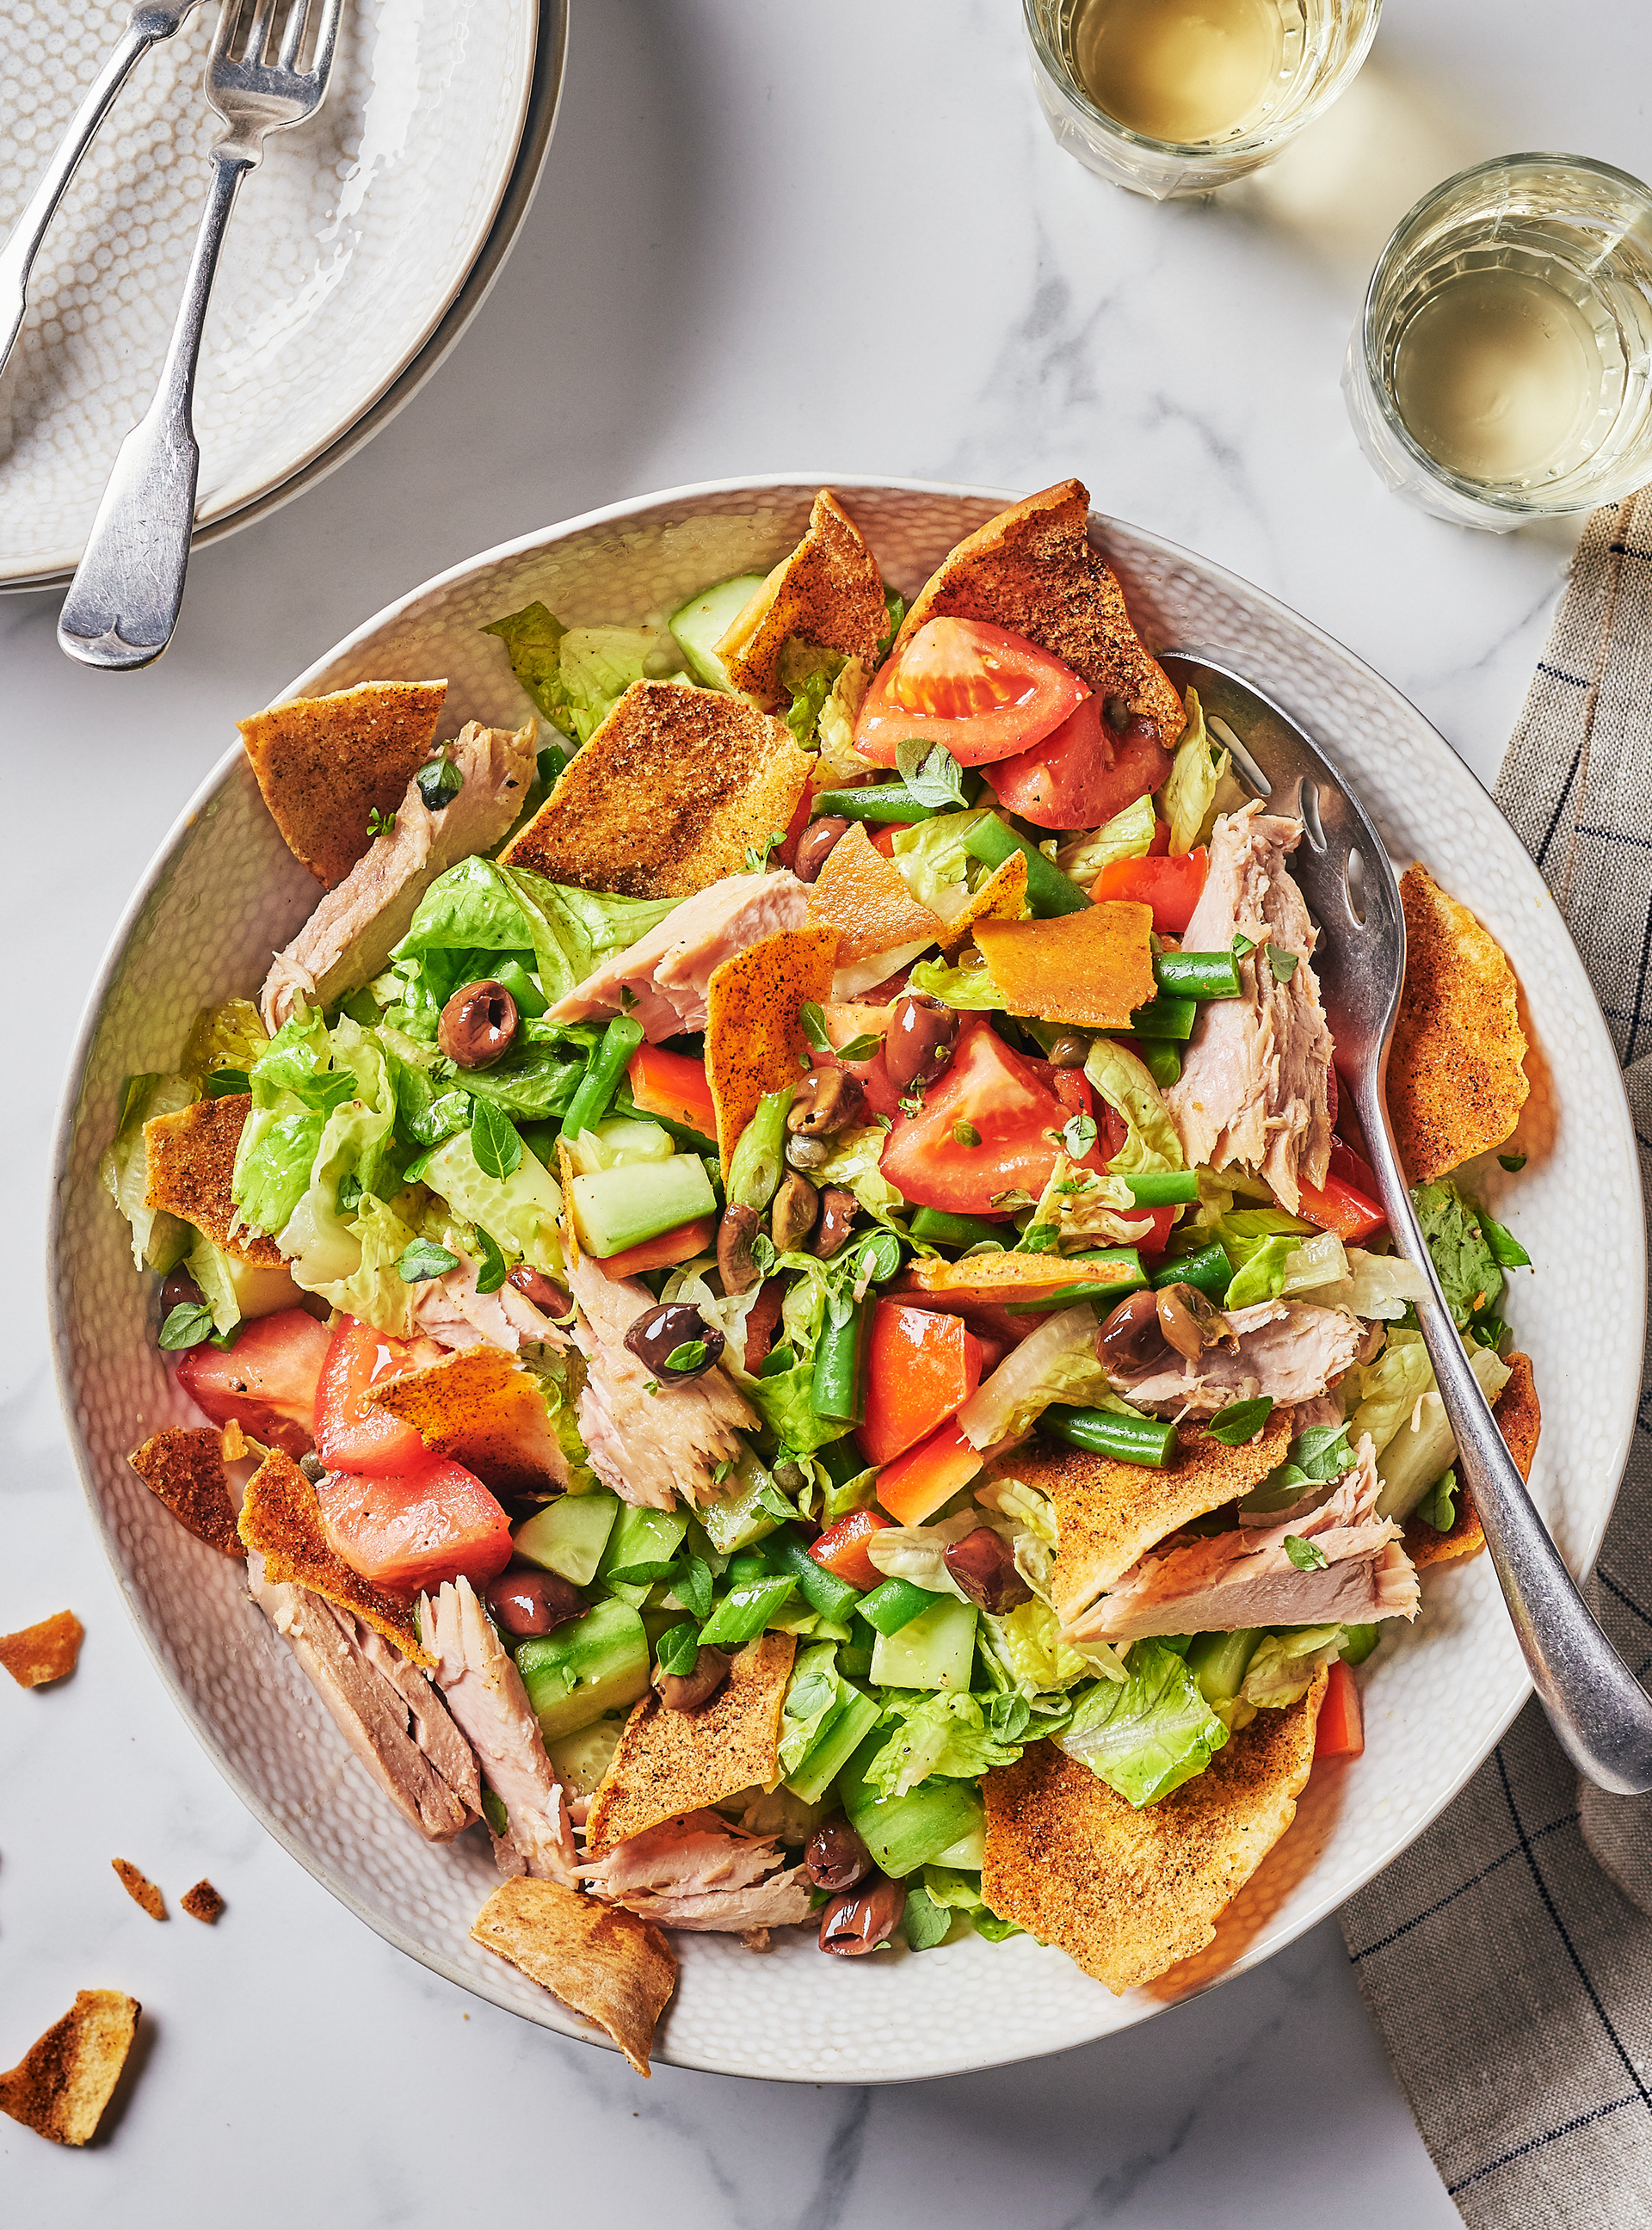 Nicoise-Style Salad with Spicy Pita